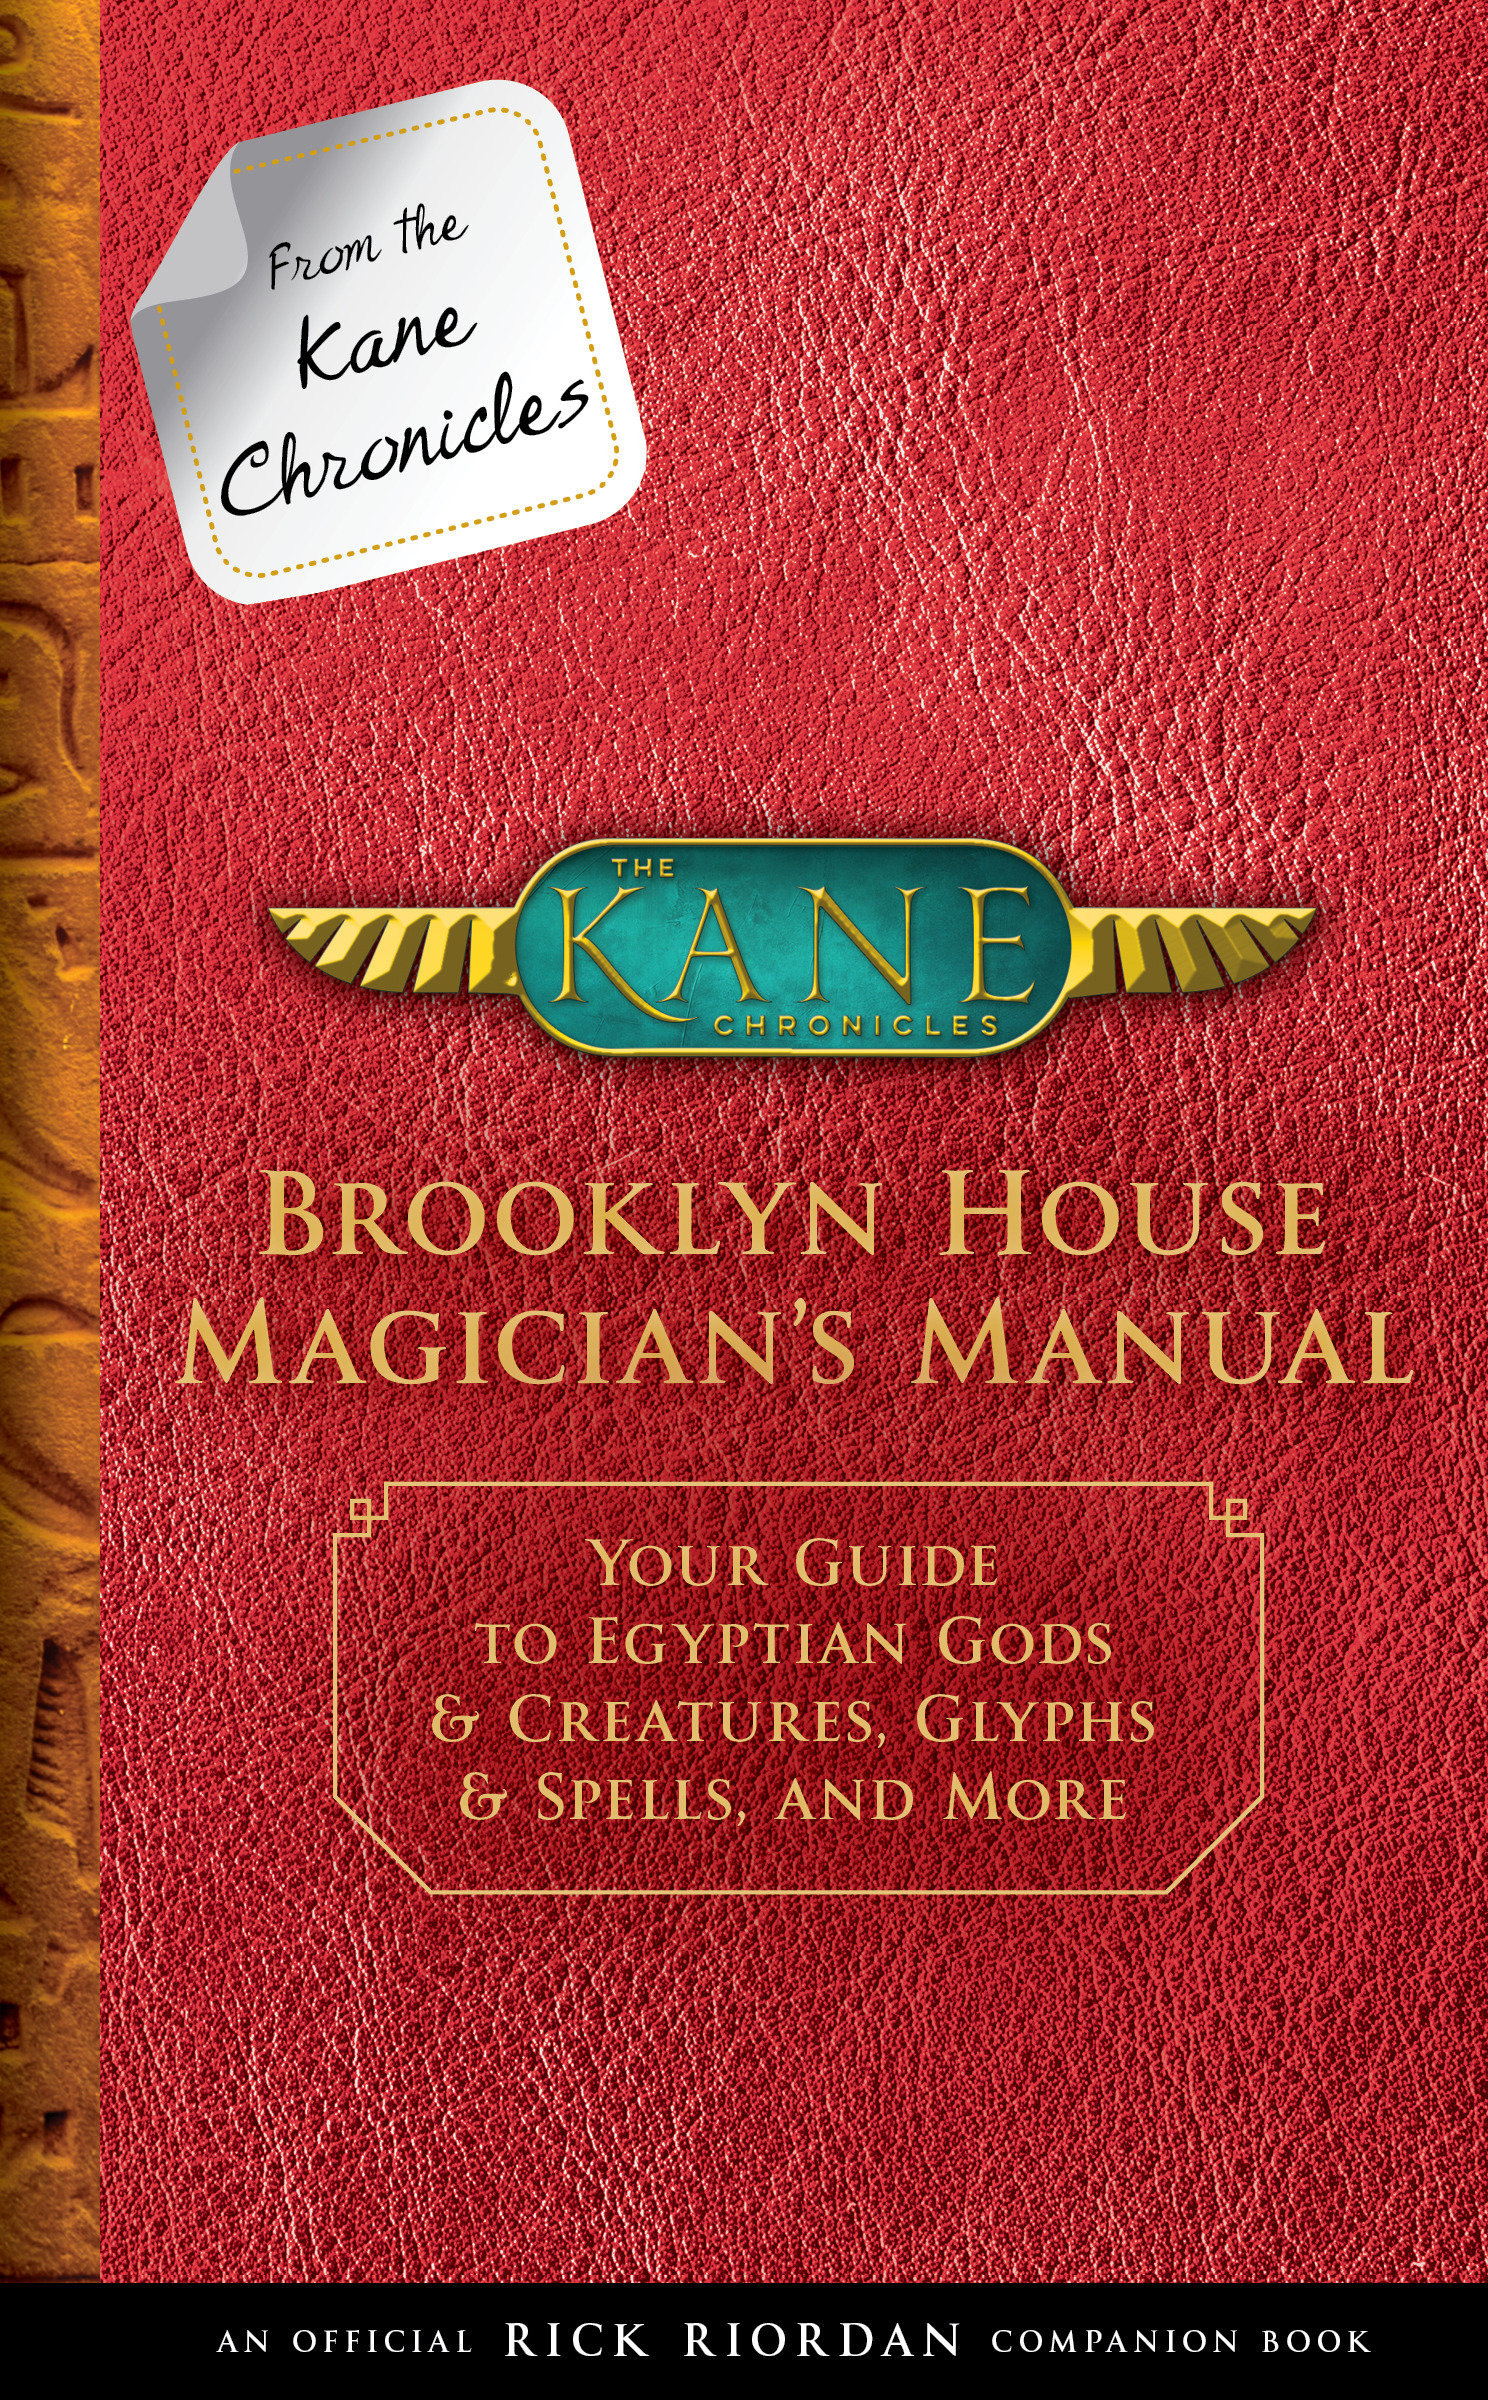 From The Kane Chronicles: Brooklyn House Magician'S Manual-An Official Rick Riordan Companion Book (Hardcover Book)